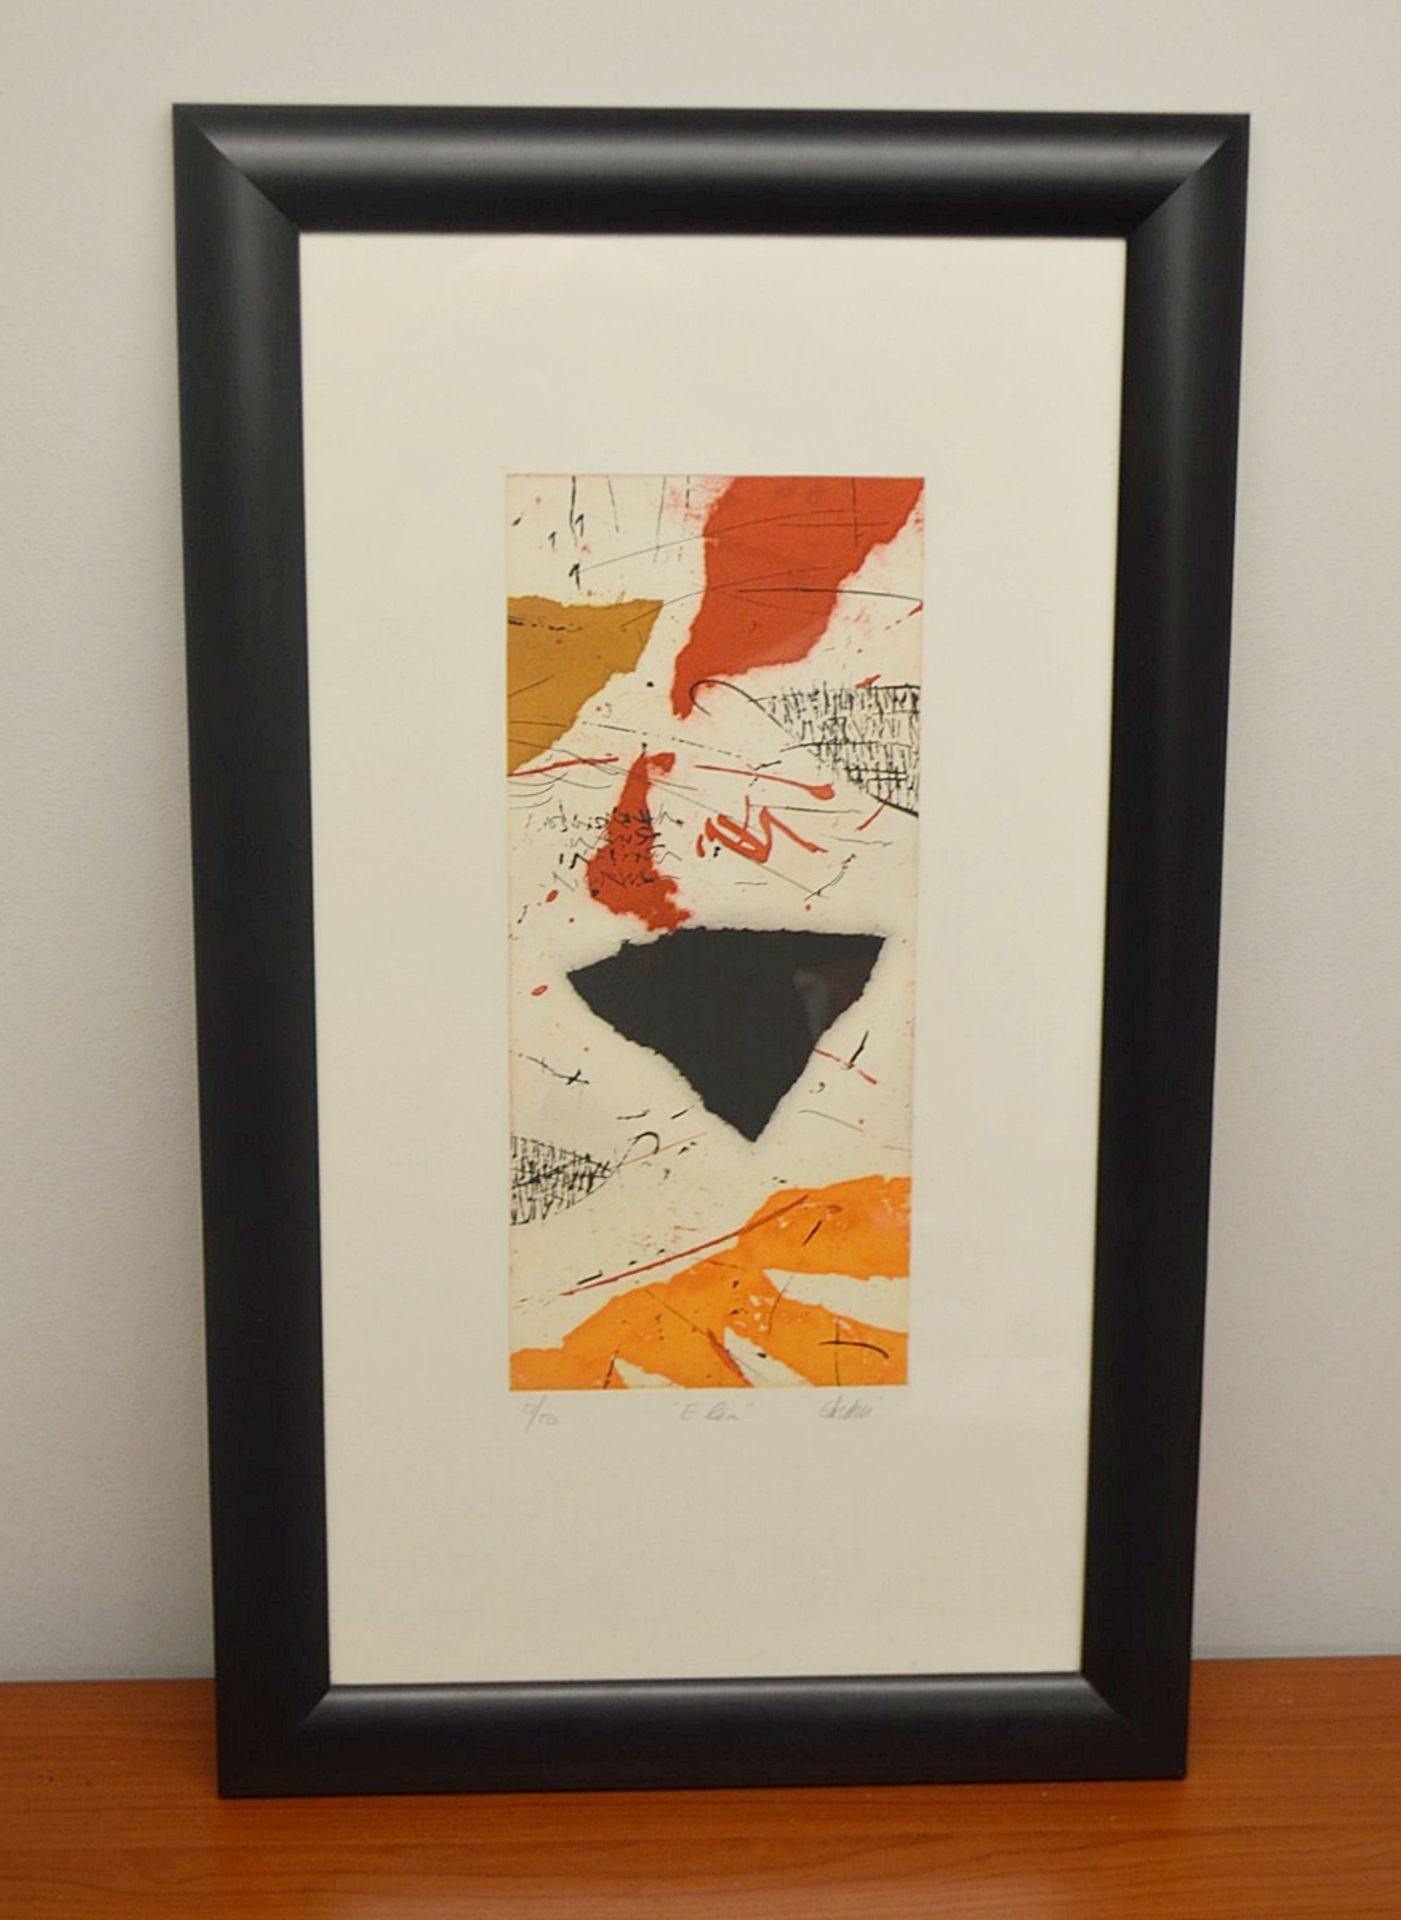 1 x Framed Contemporary Artwork - Signed And Numbered By The Artist 'RENÉ GALASSI'